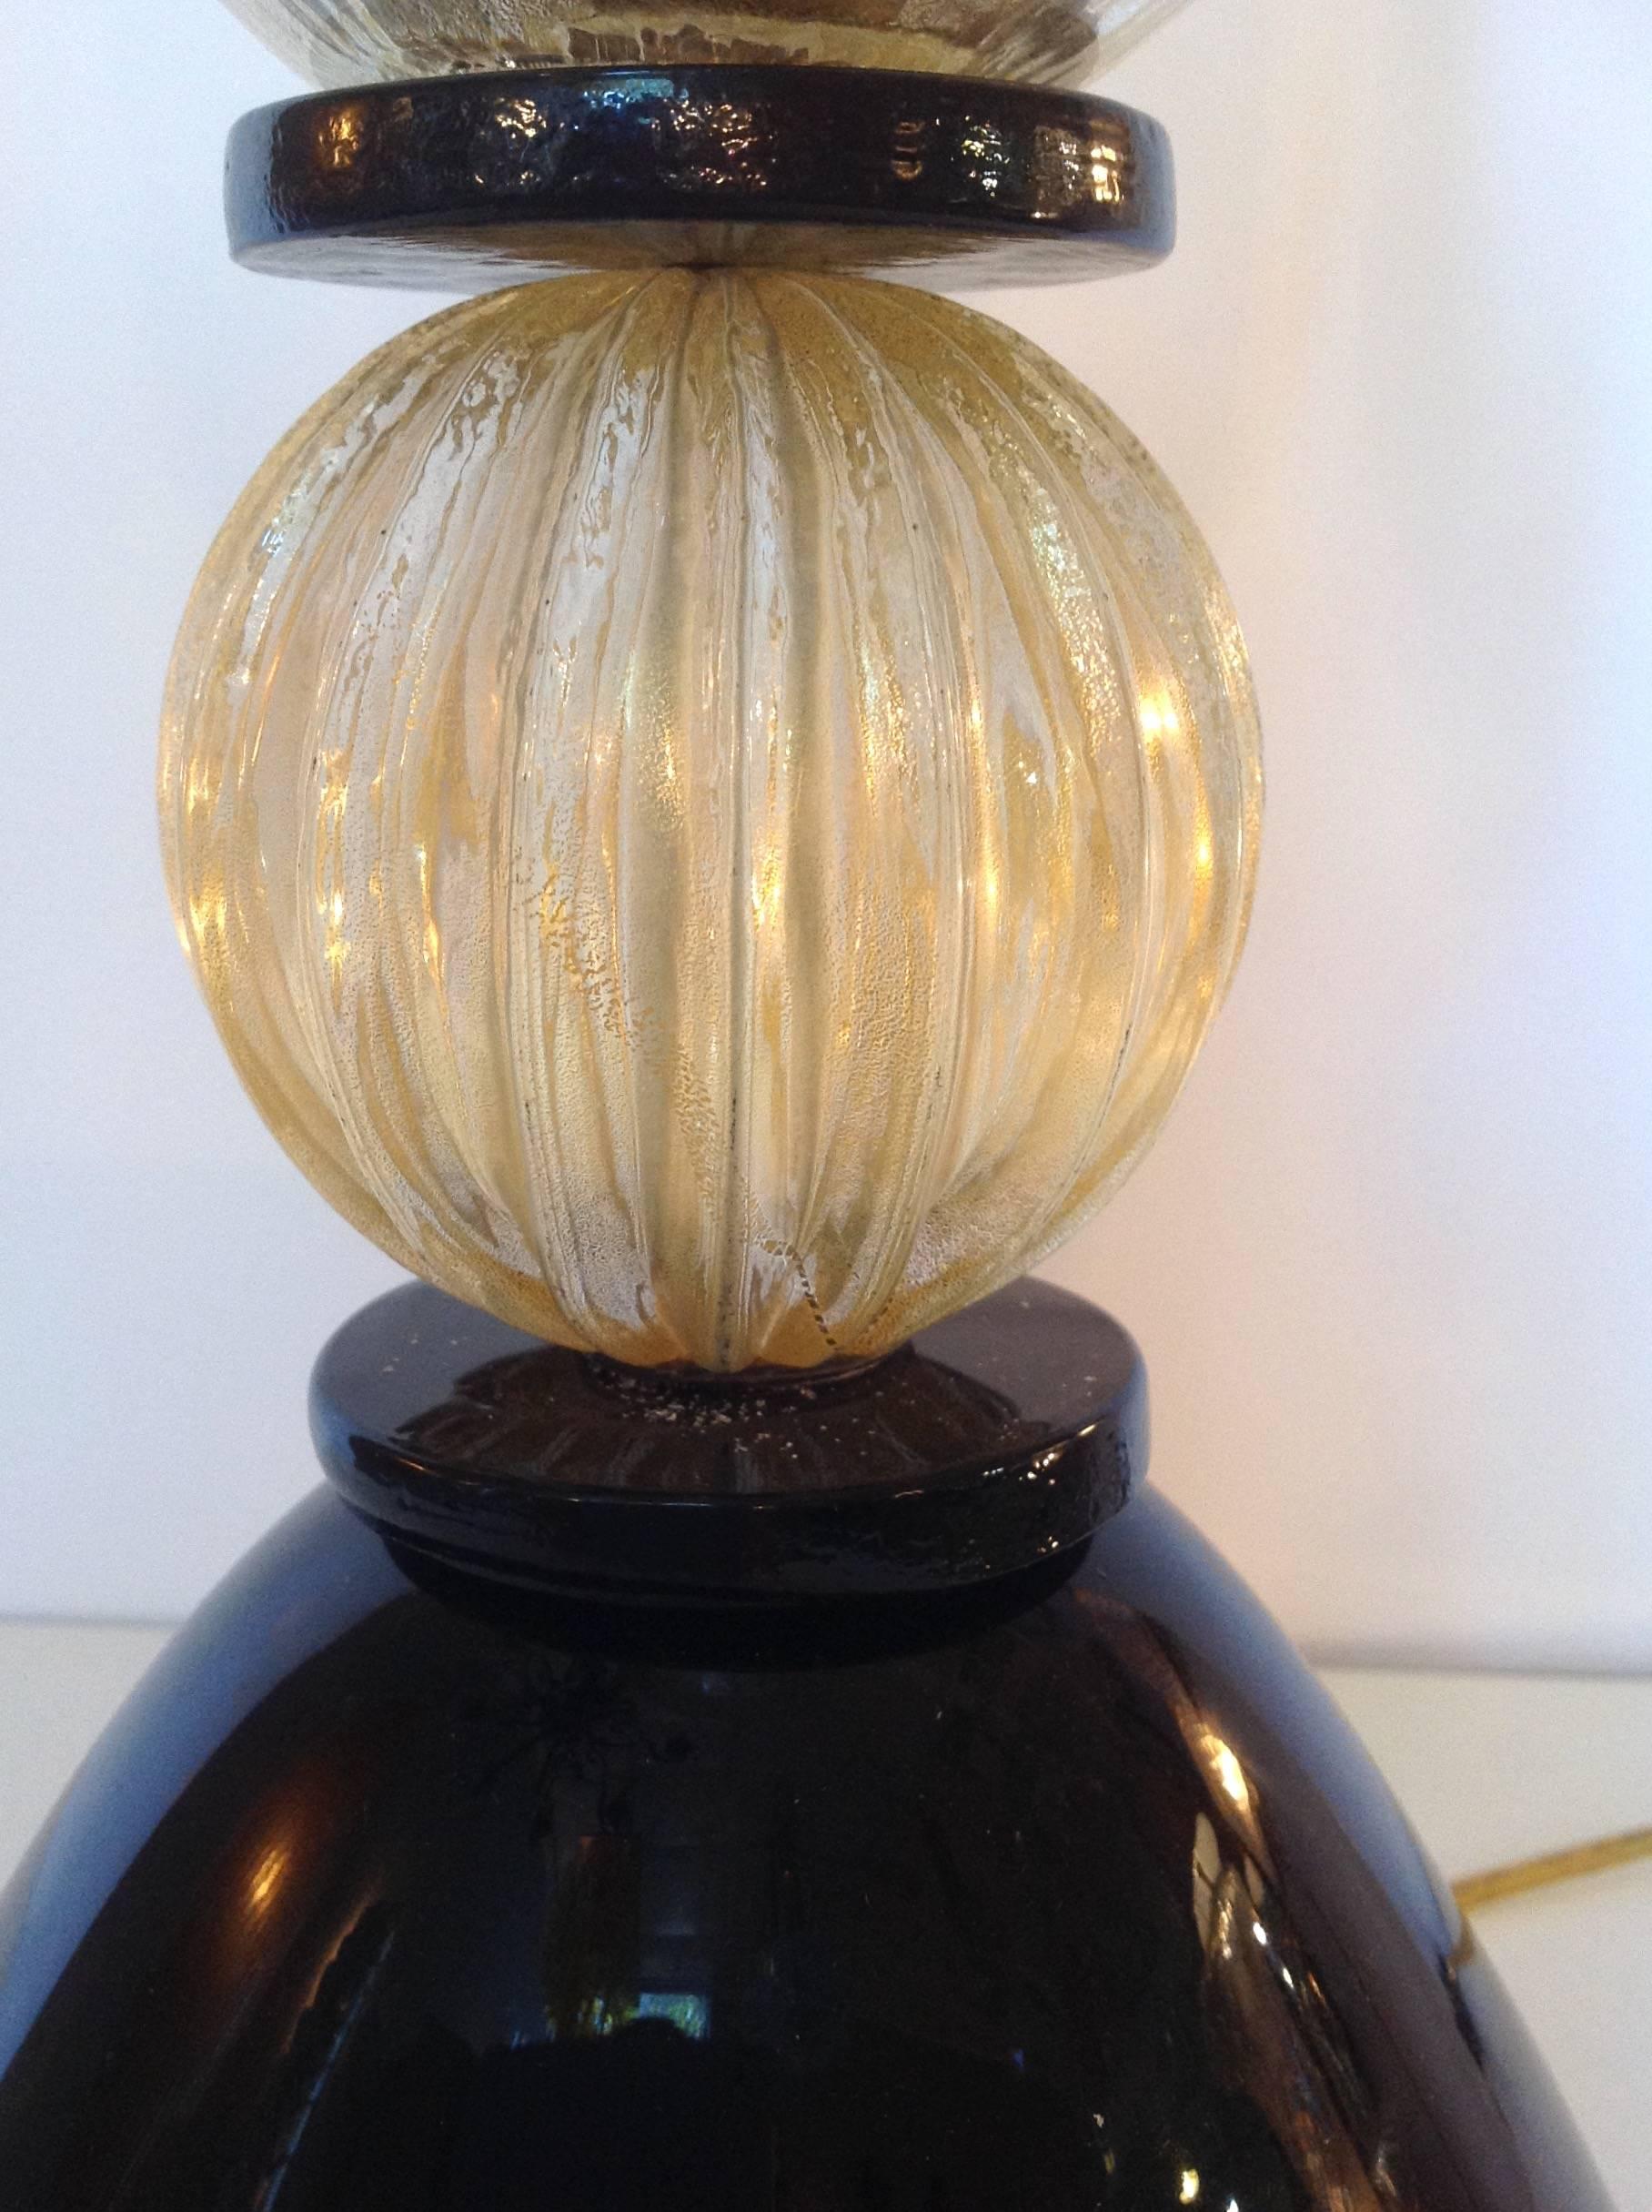 Pair of midcentury Murano glass urn lamps with gold leaf in clear glass on black glass bases. The melon shaped balls on the bases are gold infused. They were made in Italy in 1960.